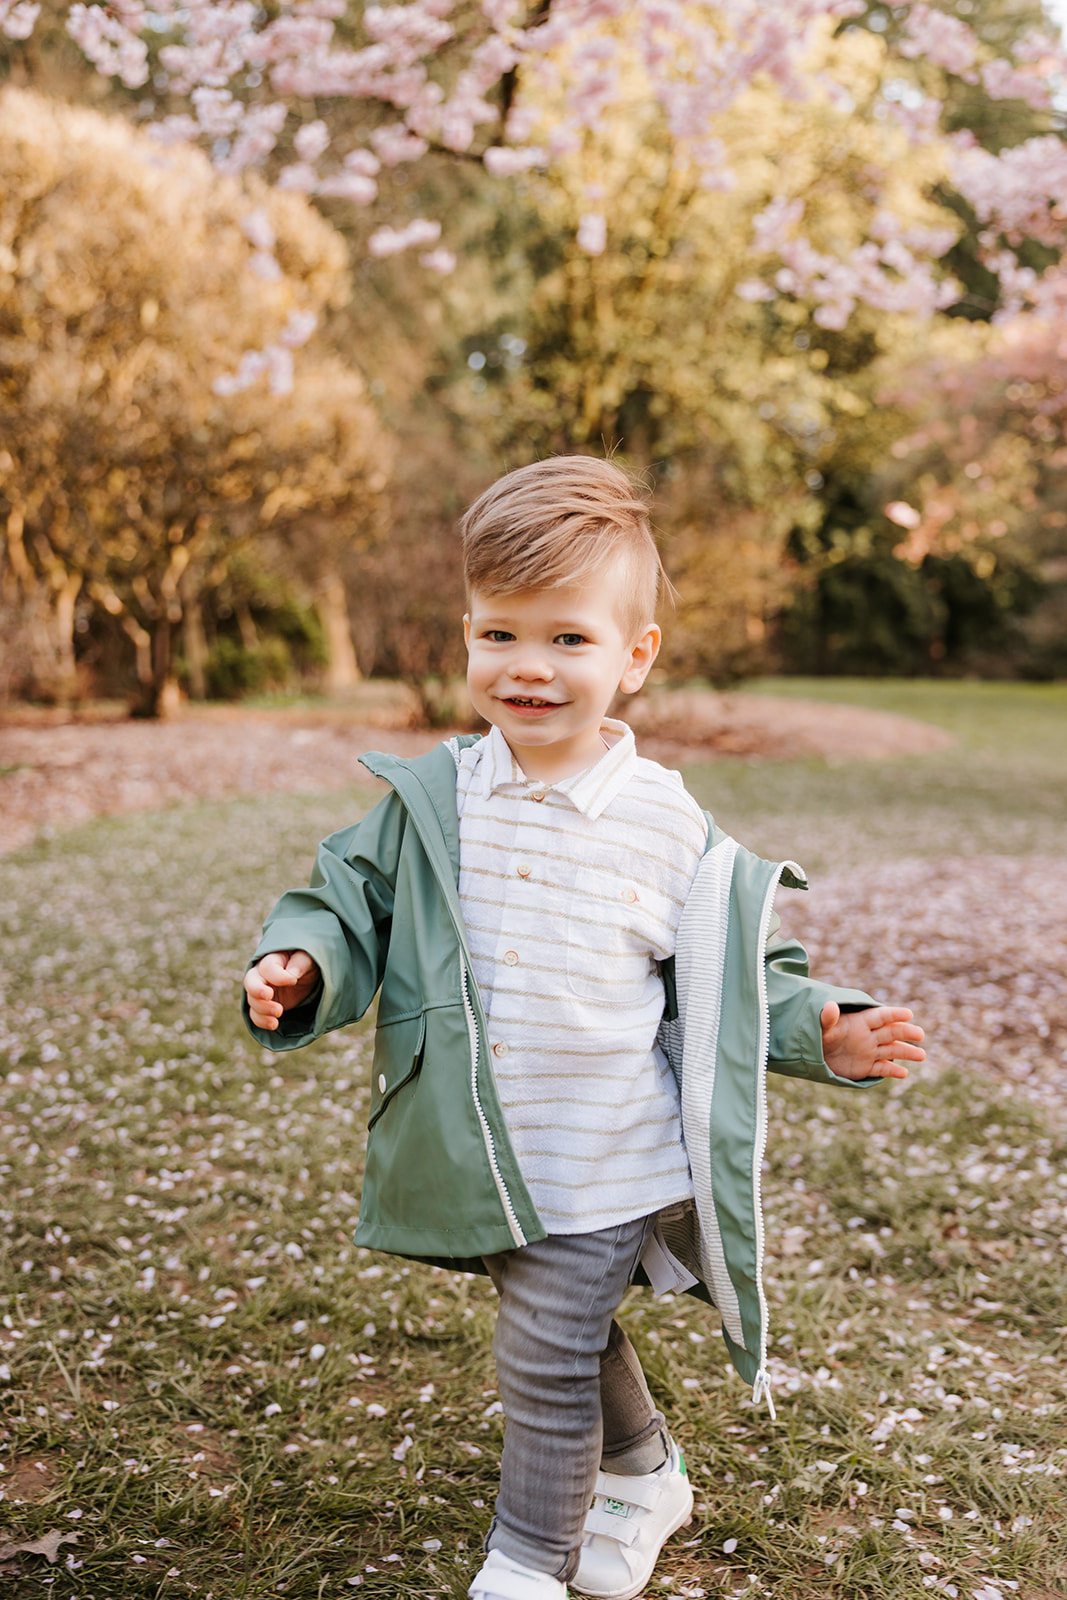 A candid photo of a young smiling toddler running in a Seattle park.